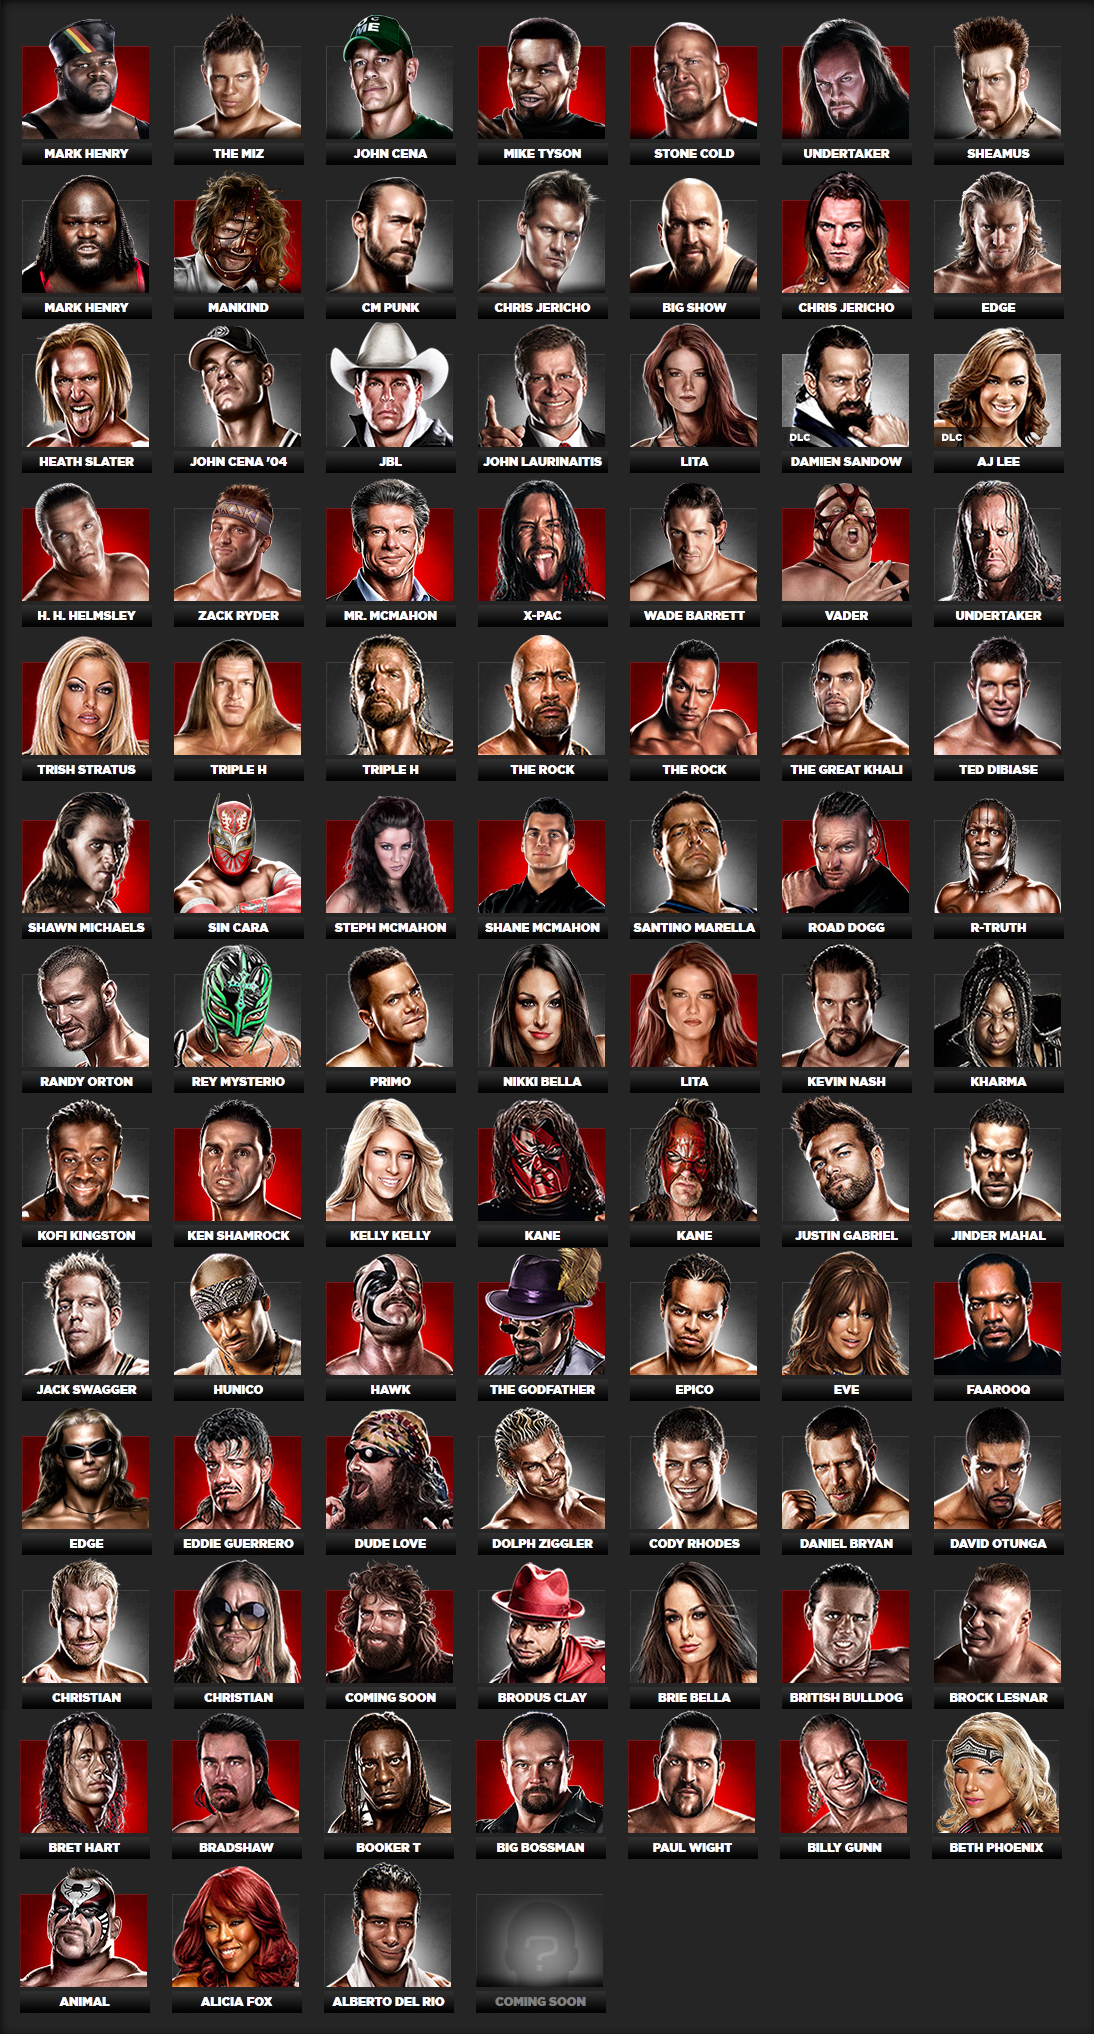 wwe 13 roster